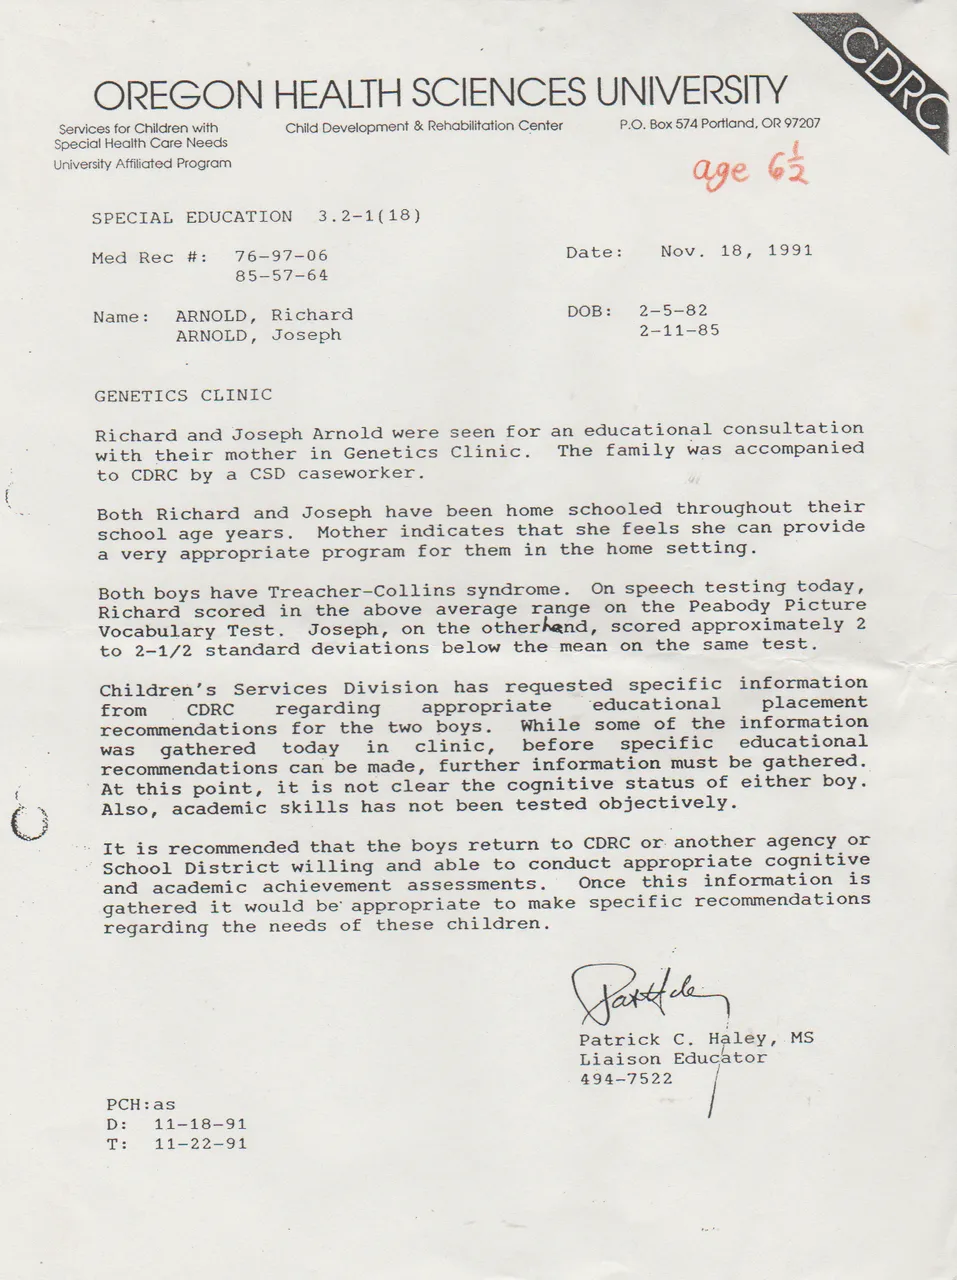 1991-11-18 - Monday - Evaluation of Joey Arnold by some MDs - Oregon Health Sciences University, Portland, OR - Patrick C Haley Letter, one pageff.png